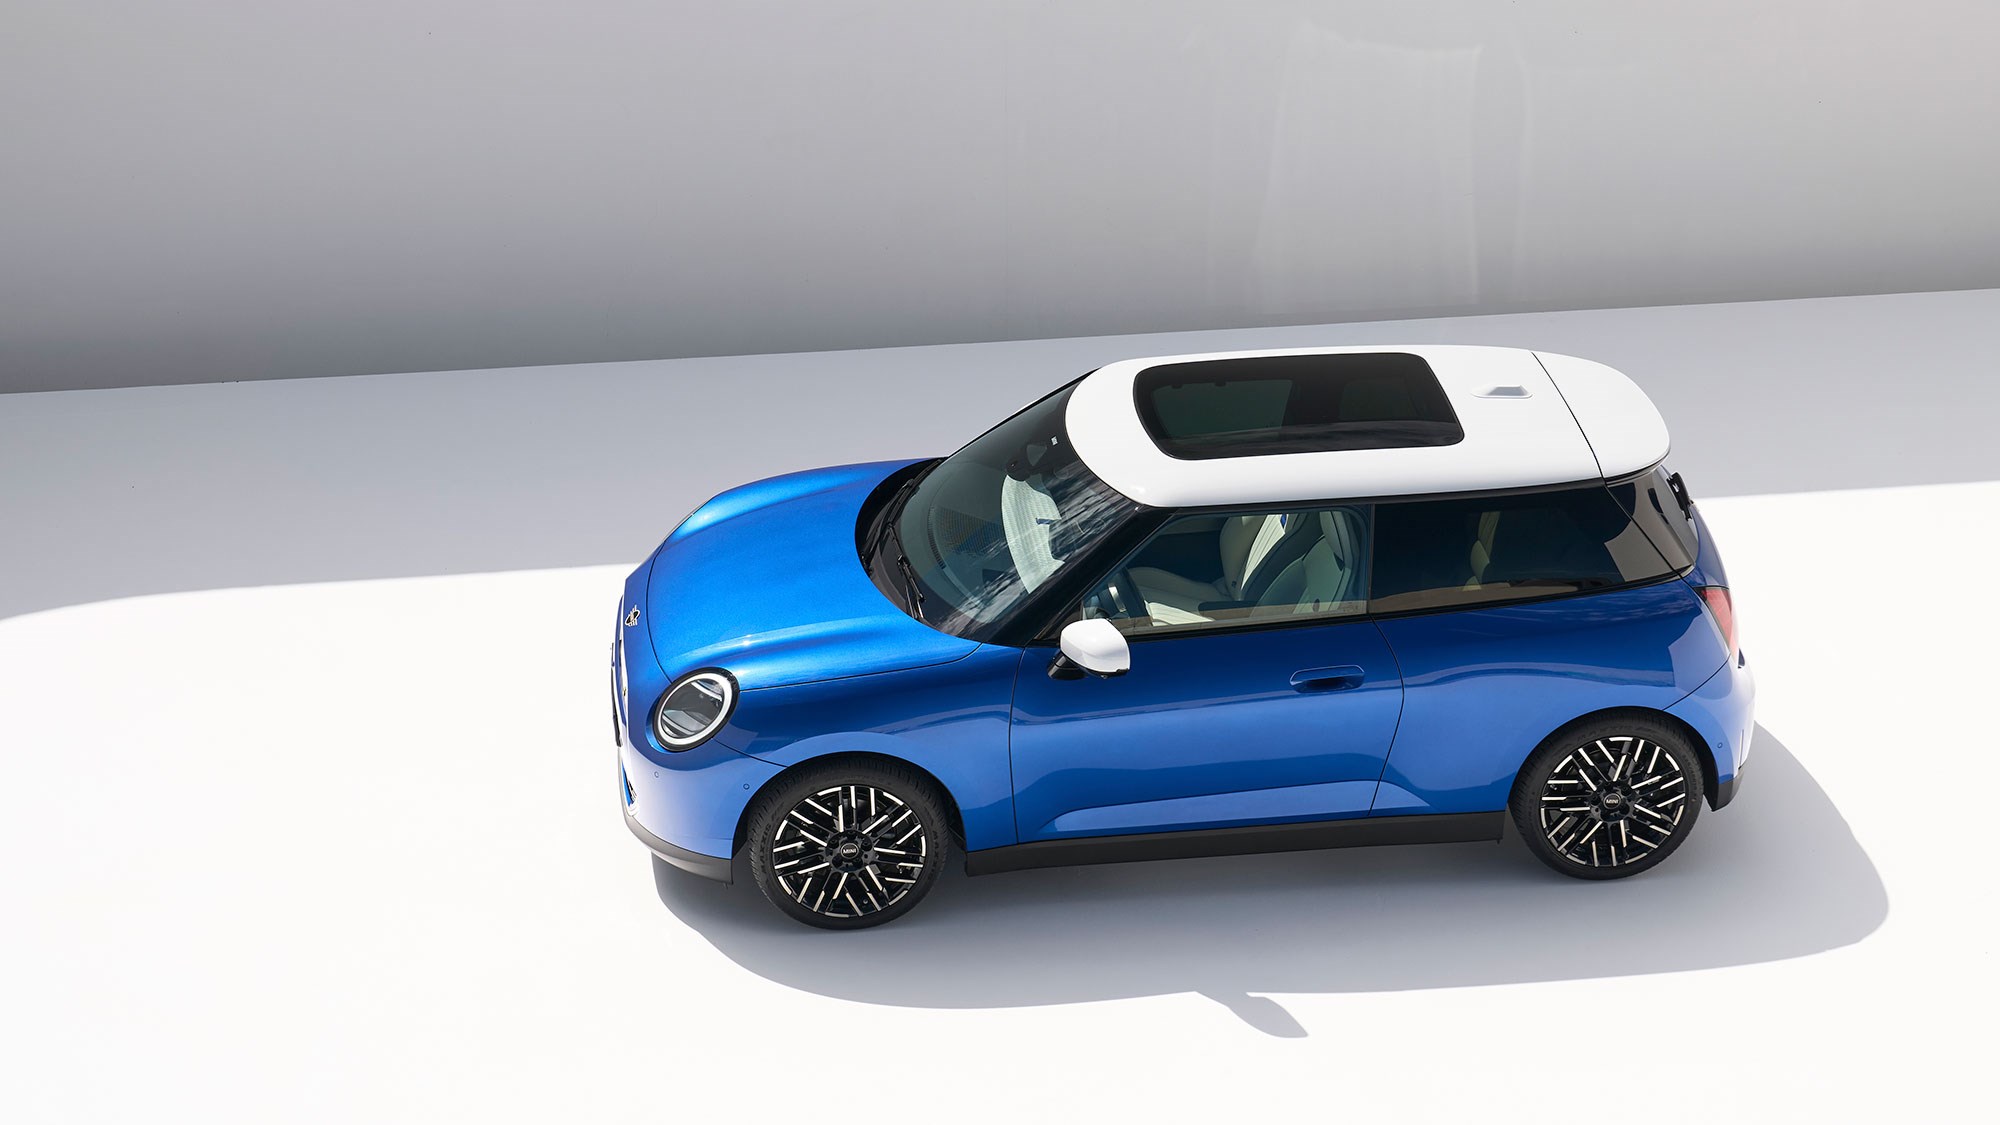 The next all-new Mini will be called the Mini Cooper and it'll